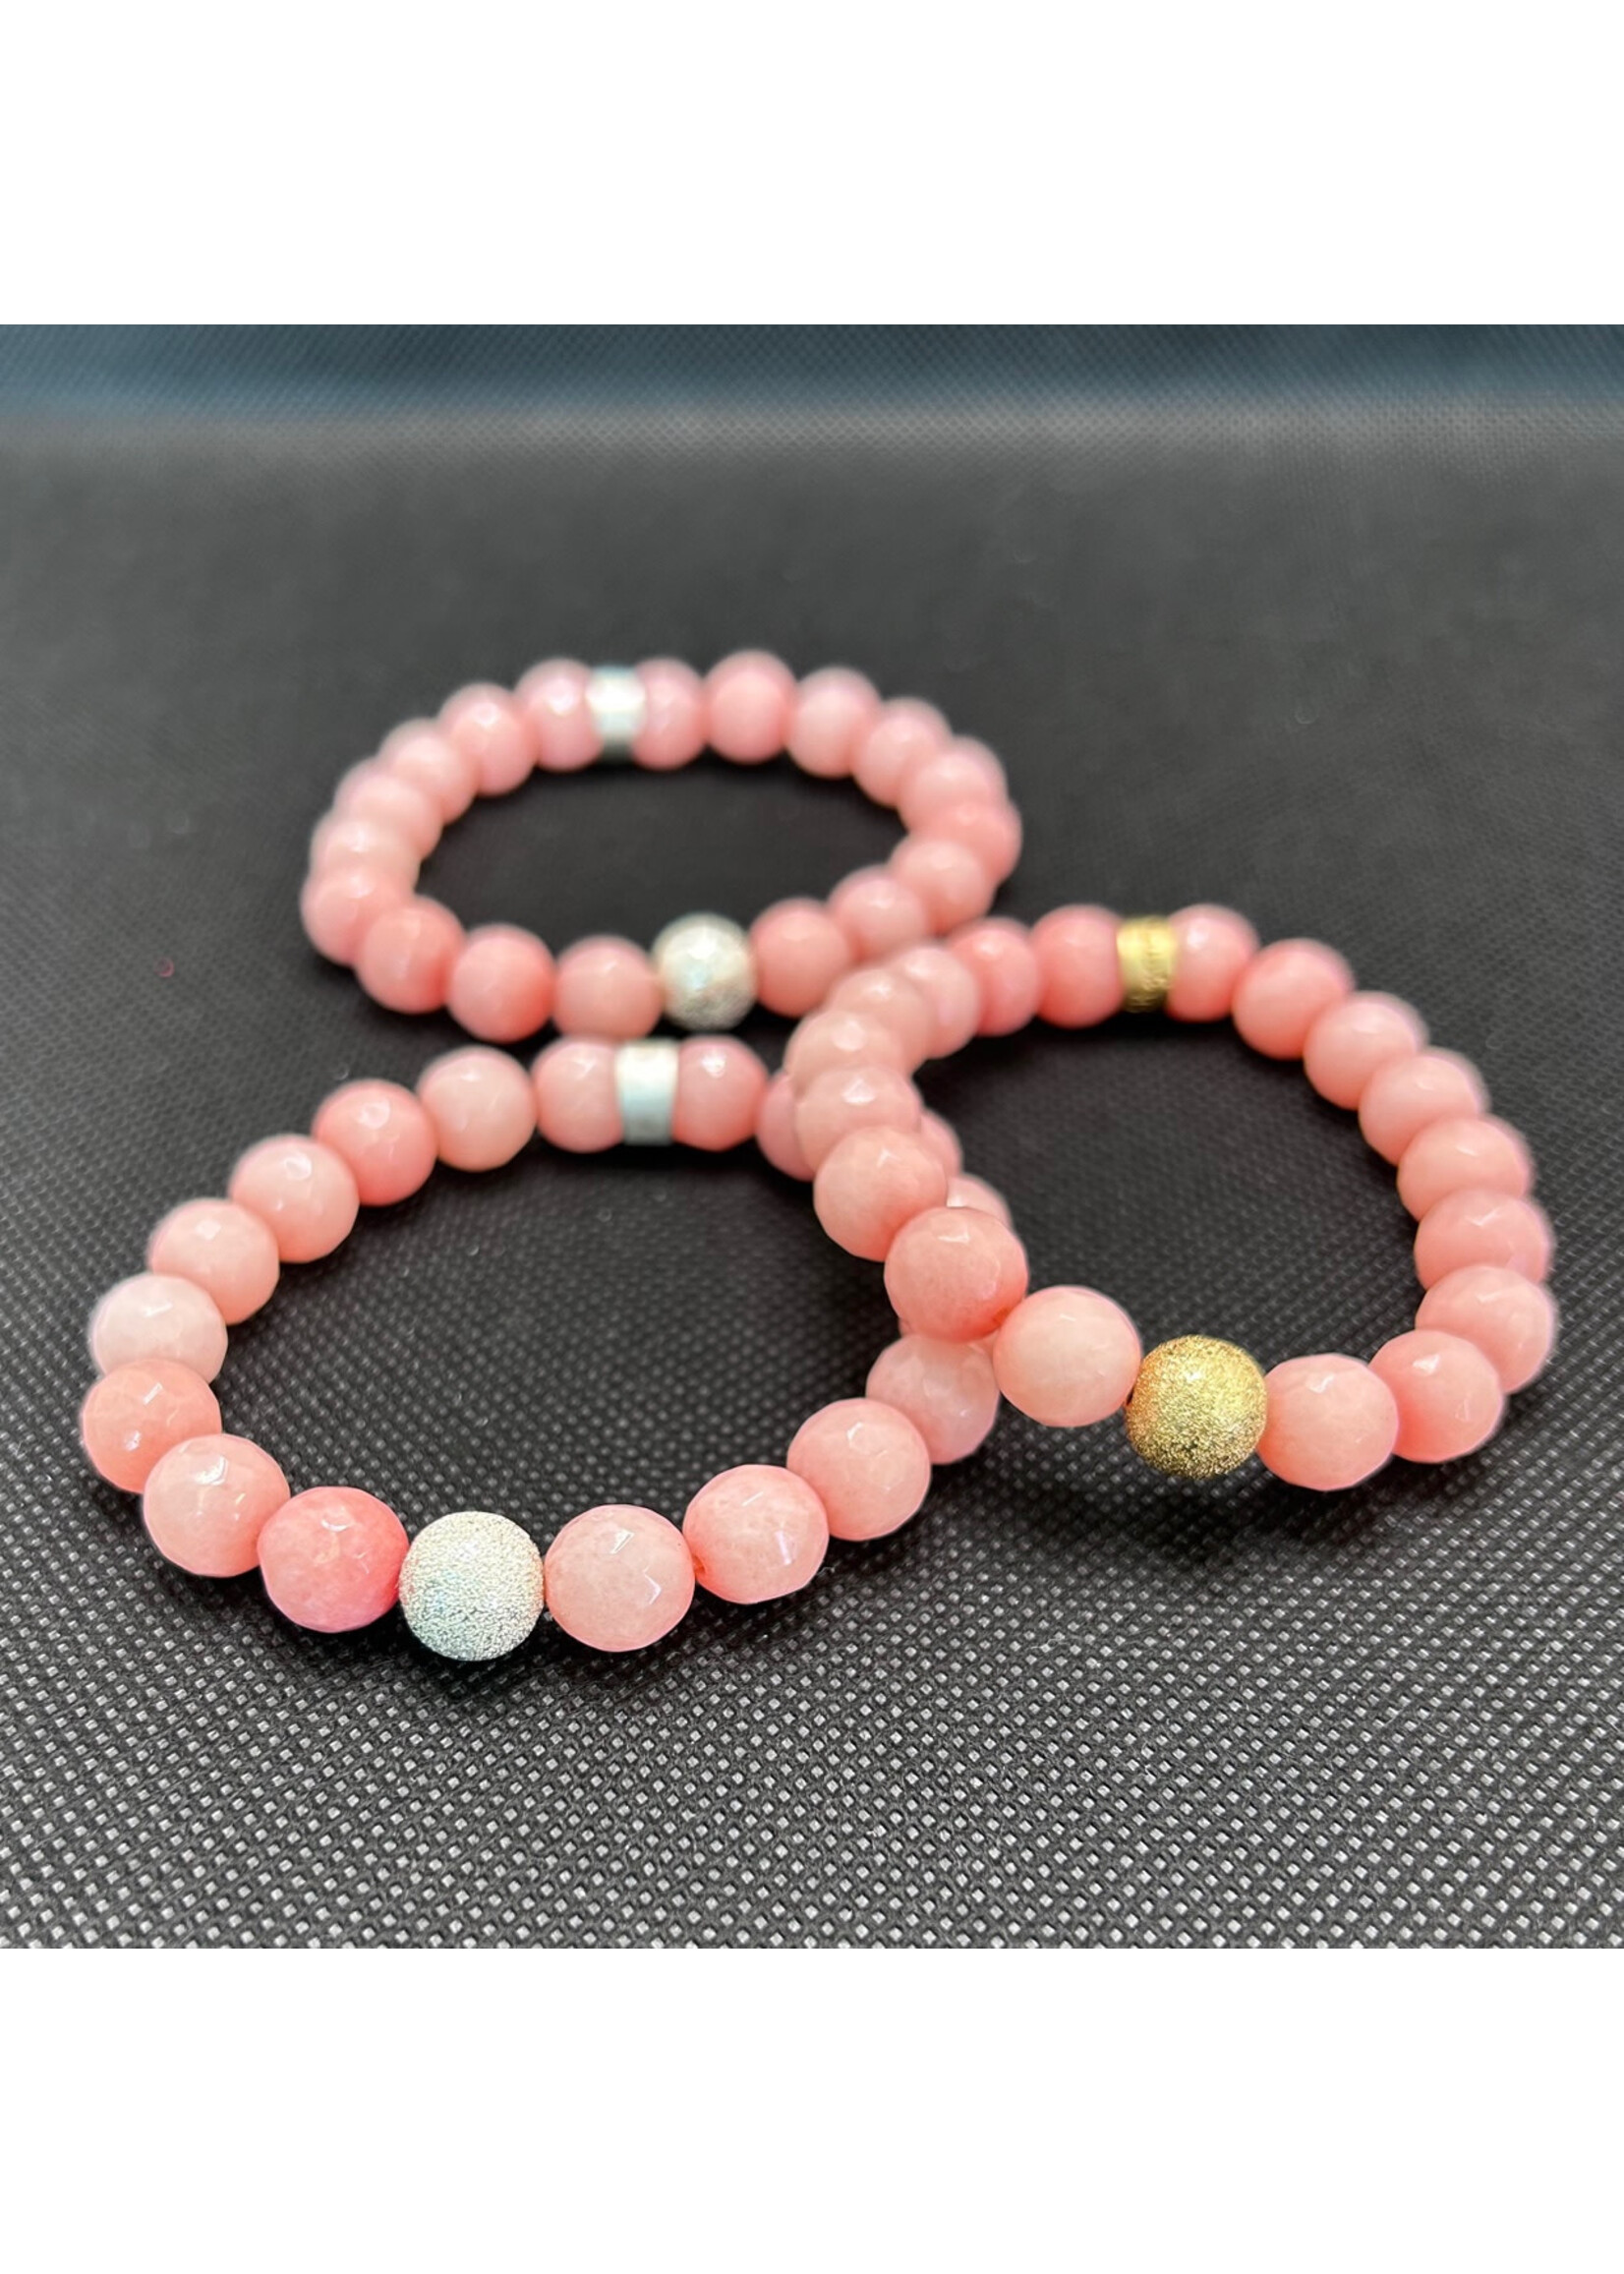 Coral Agate (Dyed) Faceted Crystal Bracelet with Gold or Silver Spacer 10 mm